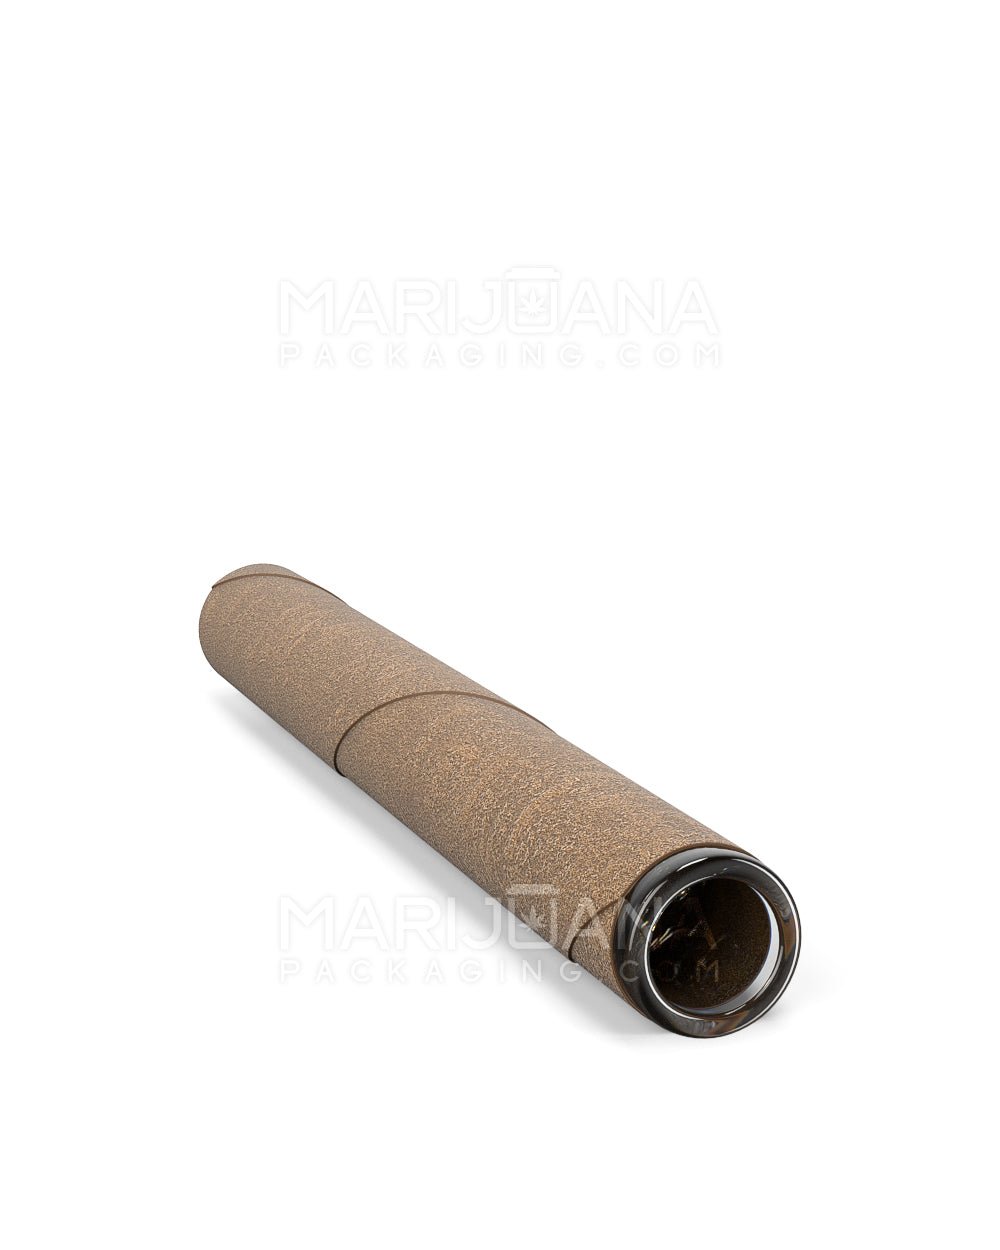 King Size Glass Tipped Wrapped Pre-Rolled Blunt Cones | 109mm - Brown Paper - 80 Count - 6